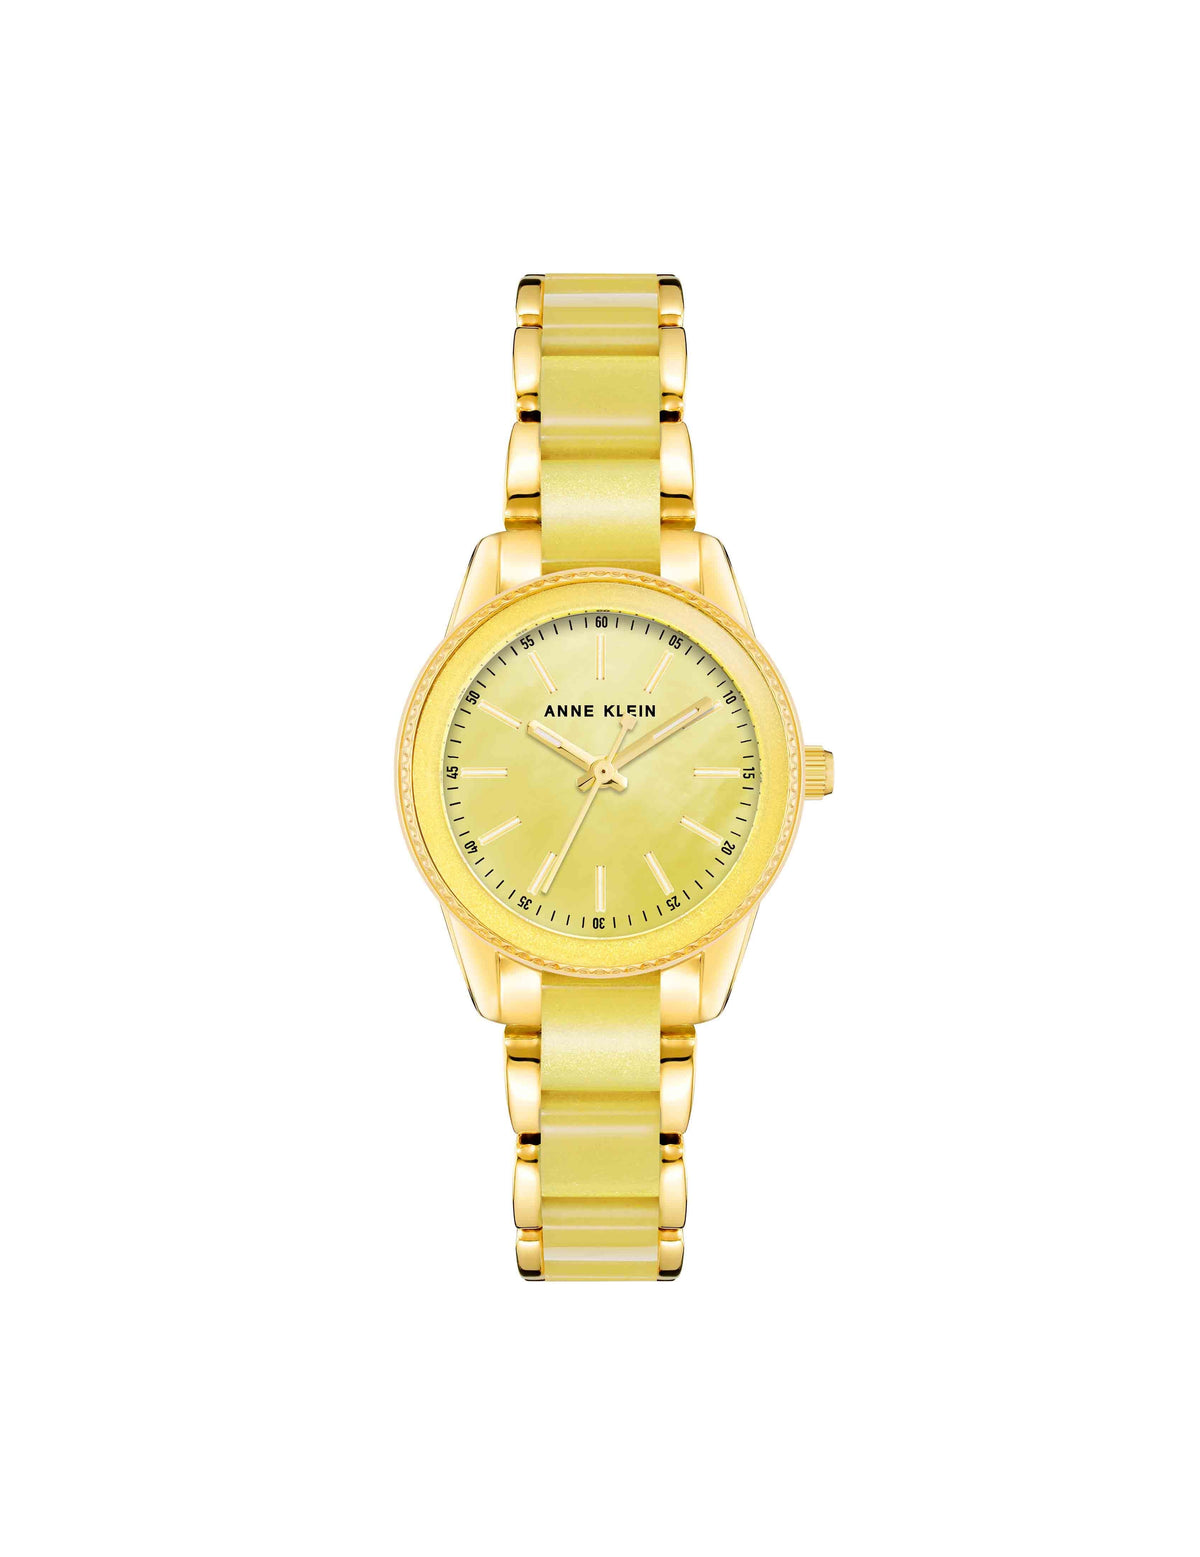 Anne Klein Gold-Tone/Yellow Pearlescent Resin Link Bracelet Watch